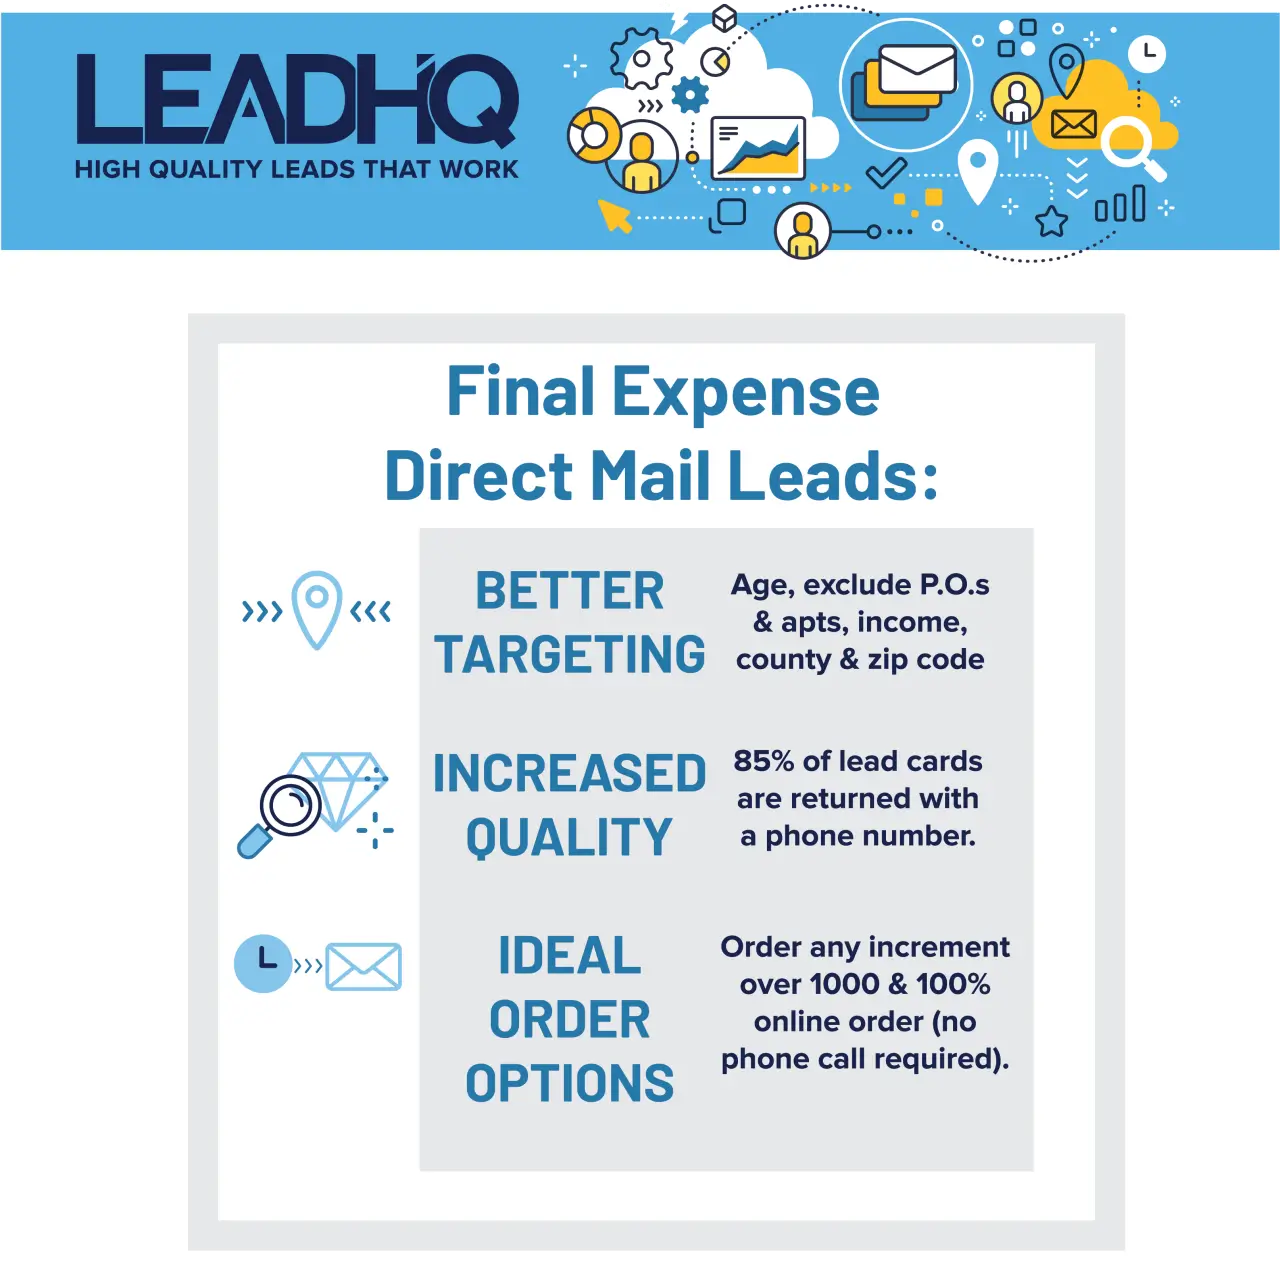 image of final expense direct mail lead benefits